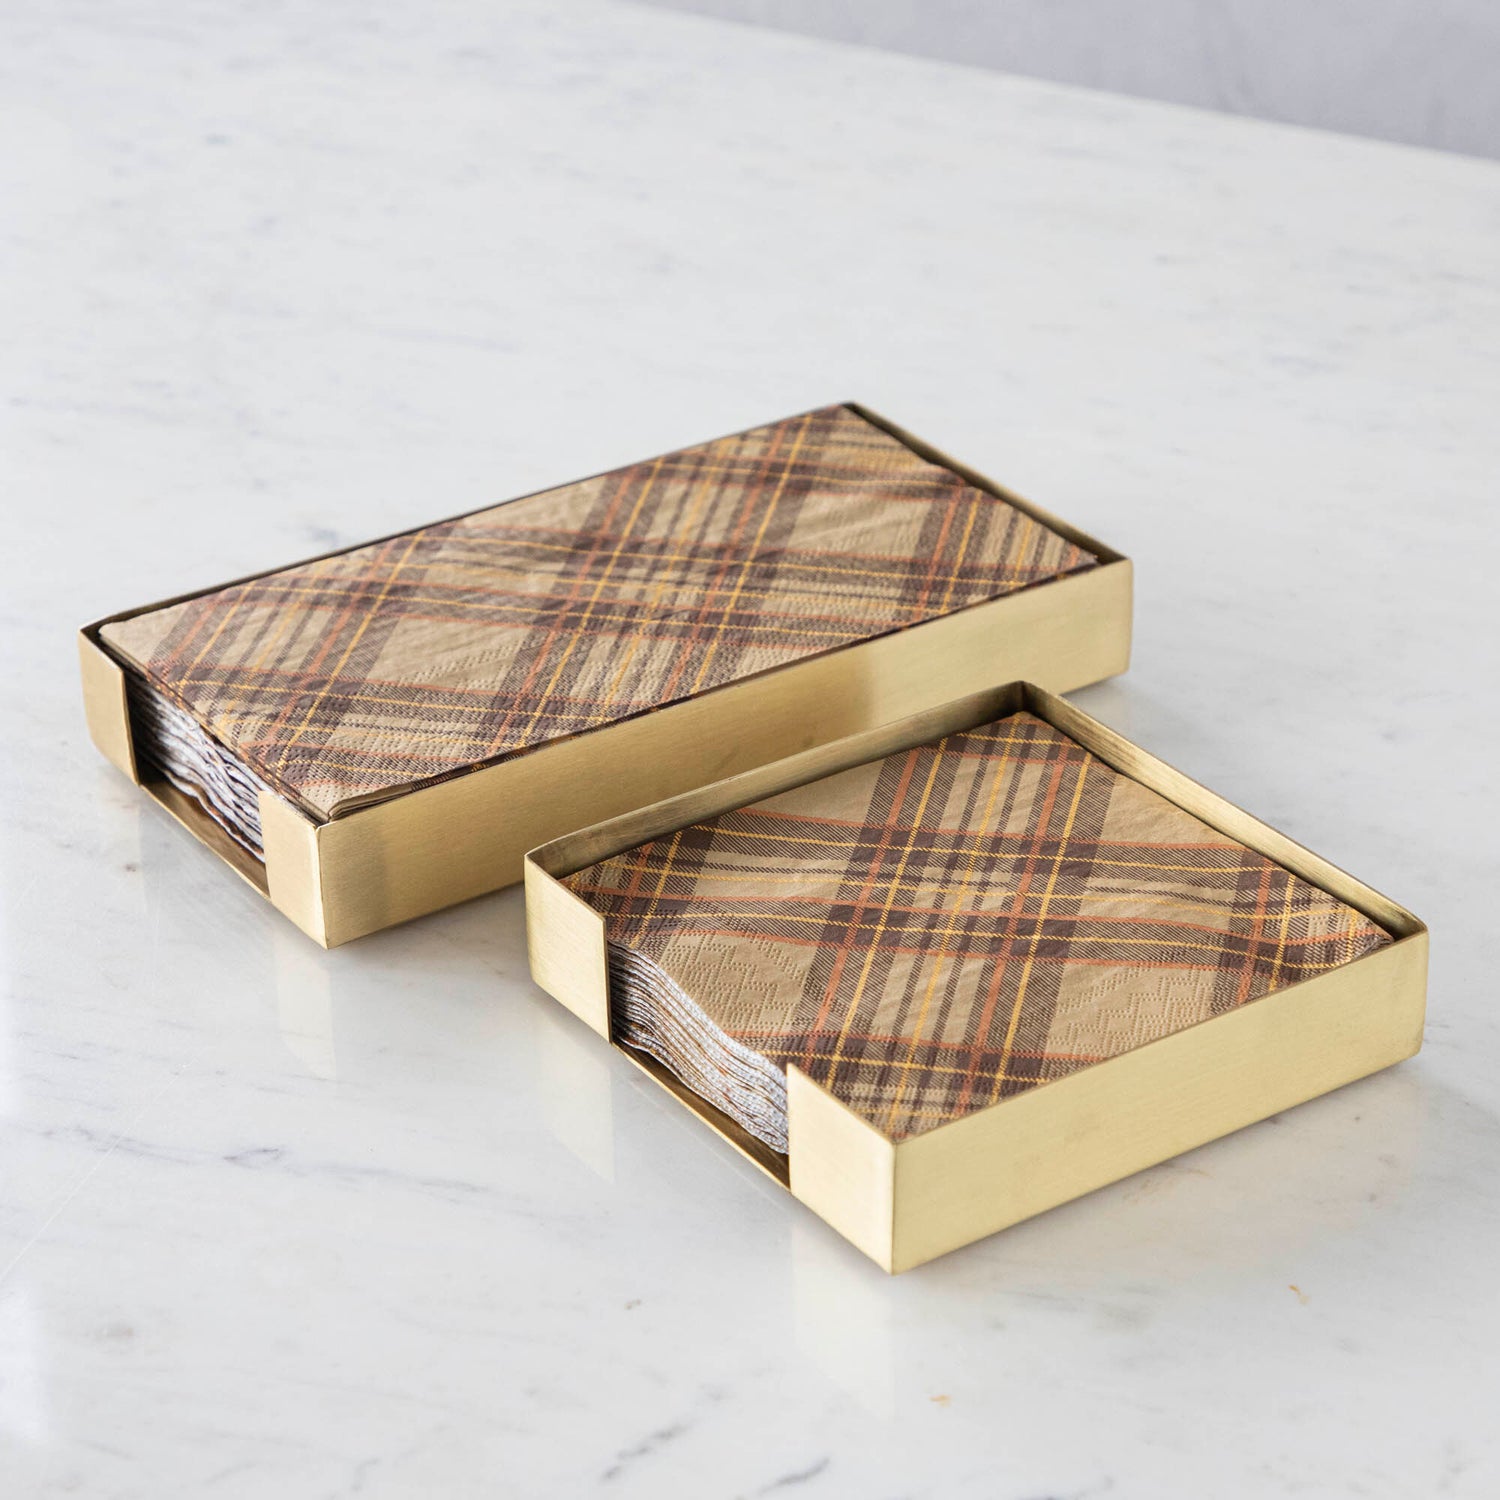 Two Brass Napkin Holders, guest-sized and cocktail-sized, containing brown plaid napkins on a white table.